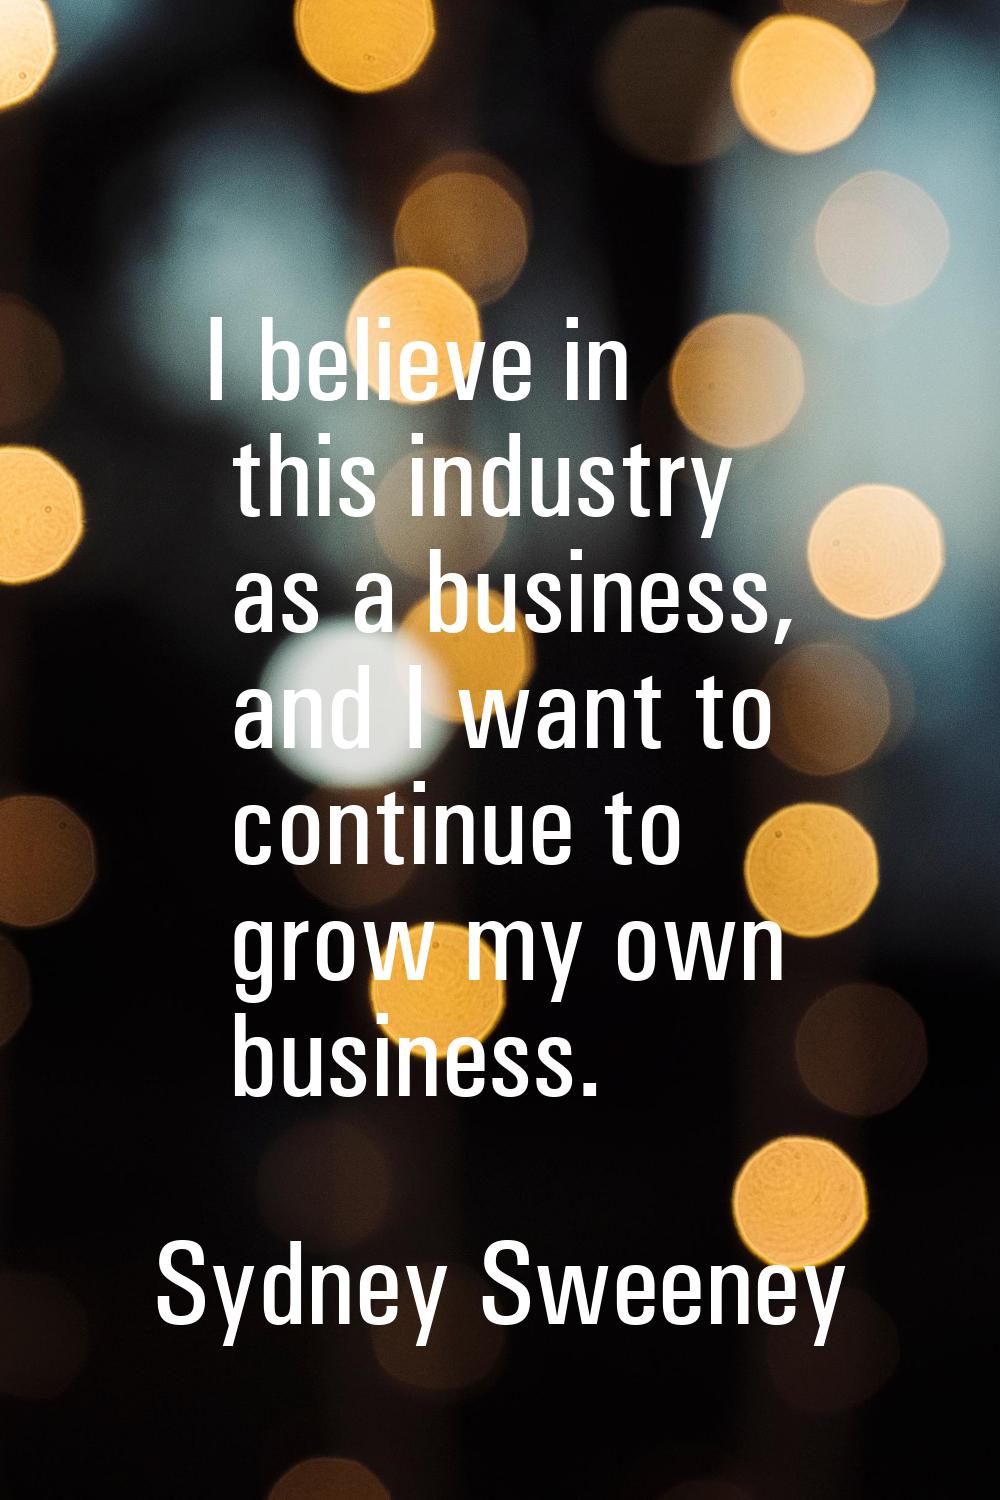 I believe in this industry as a business, and I want to continue to grow my own business.